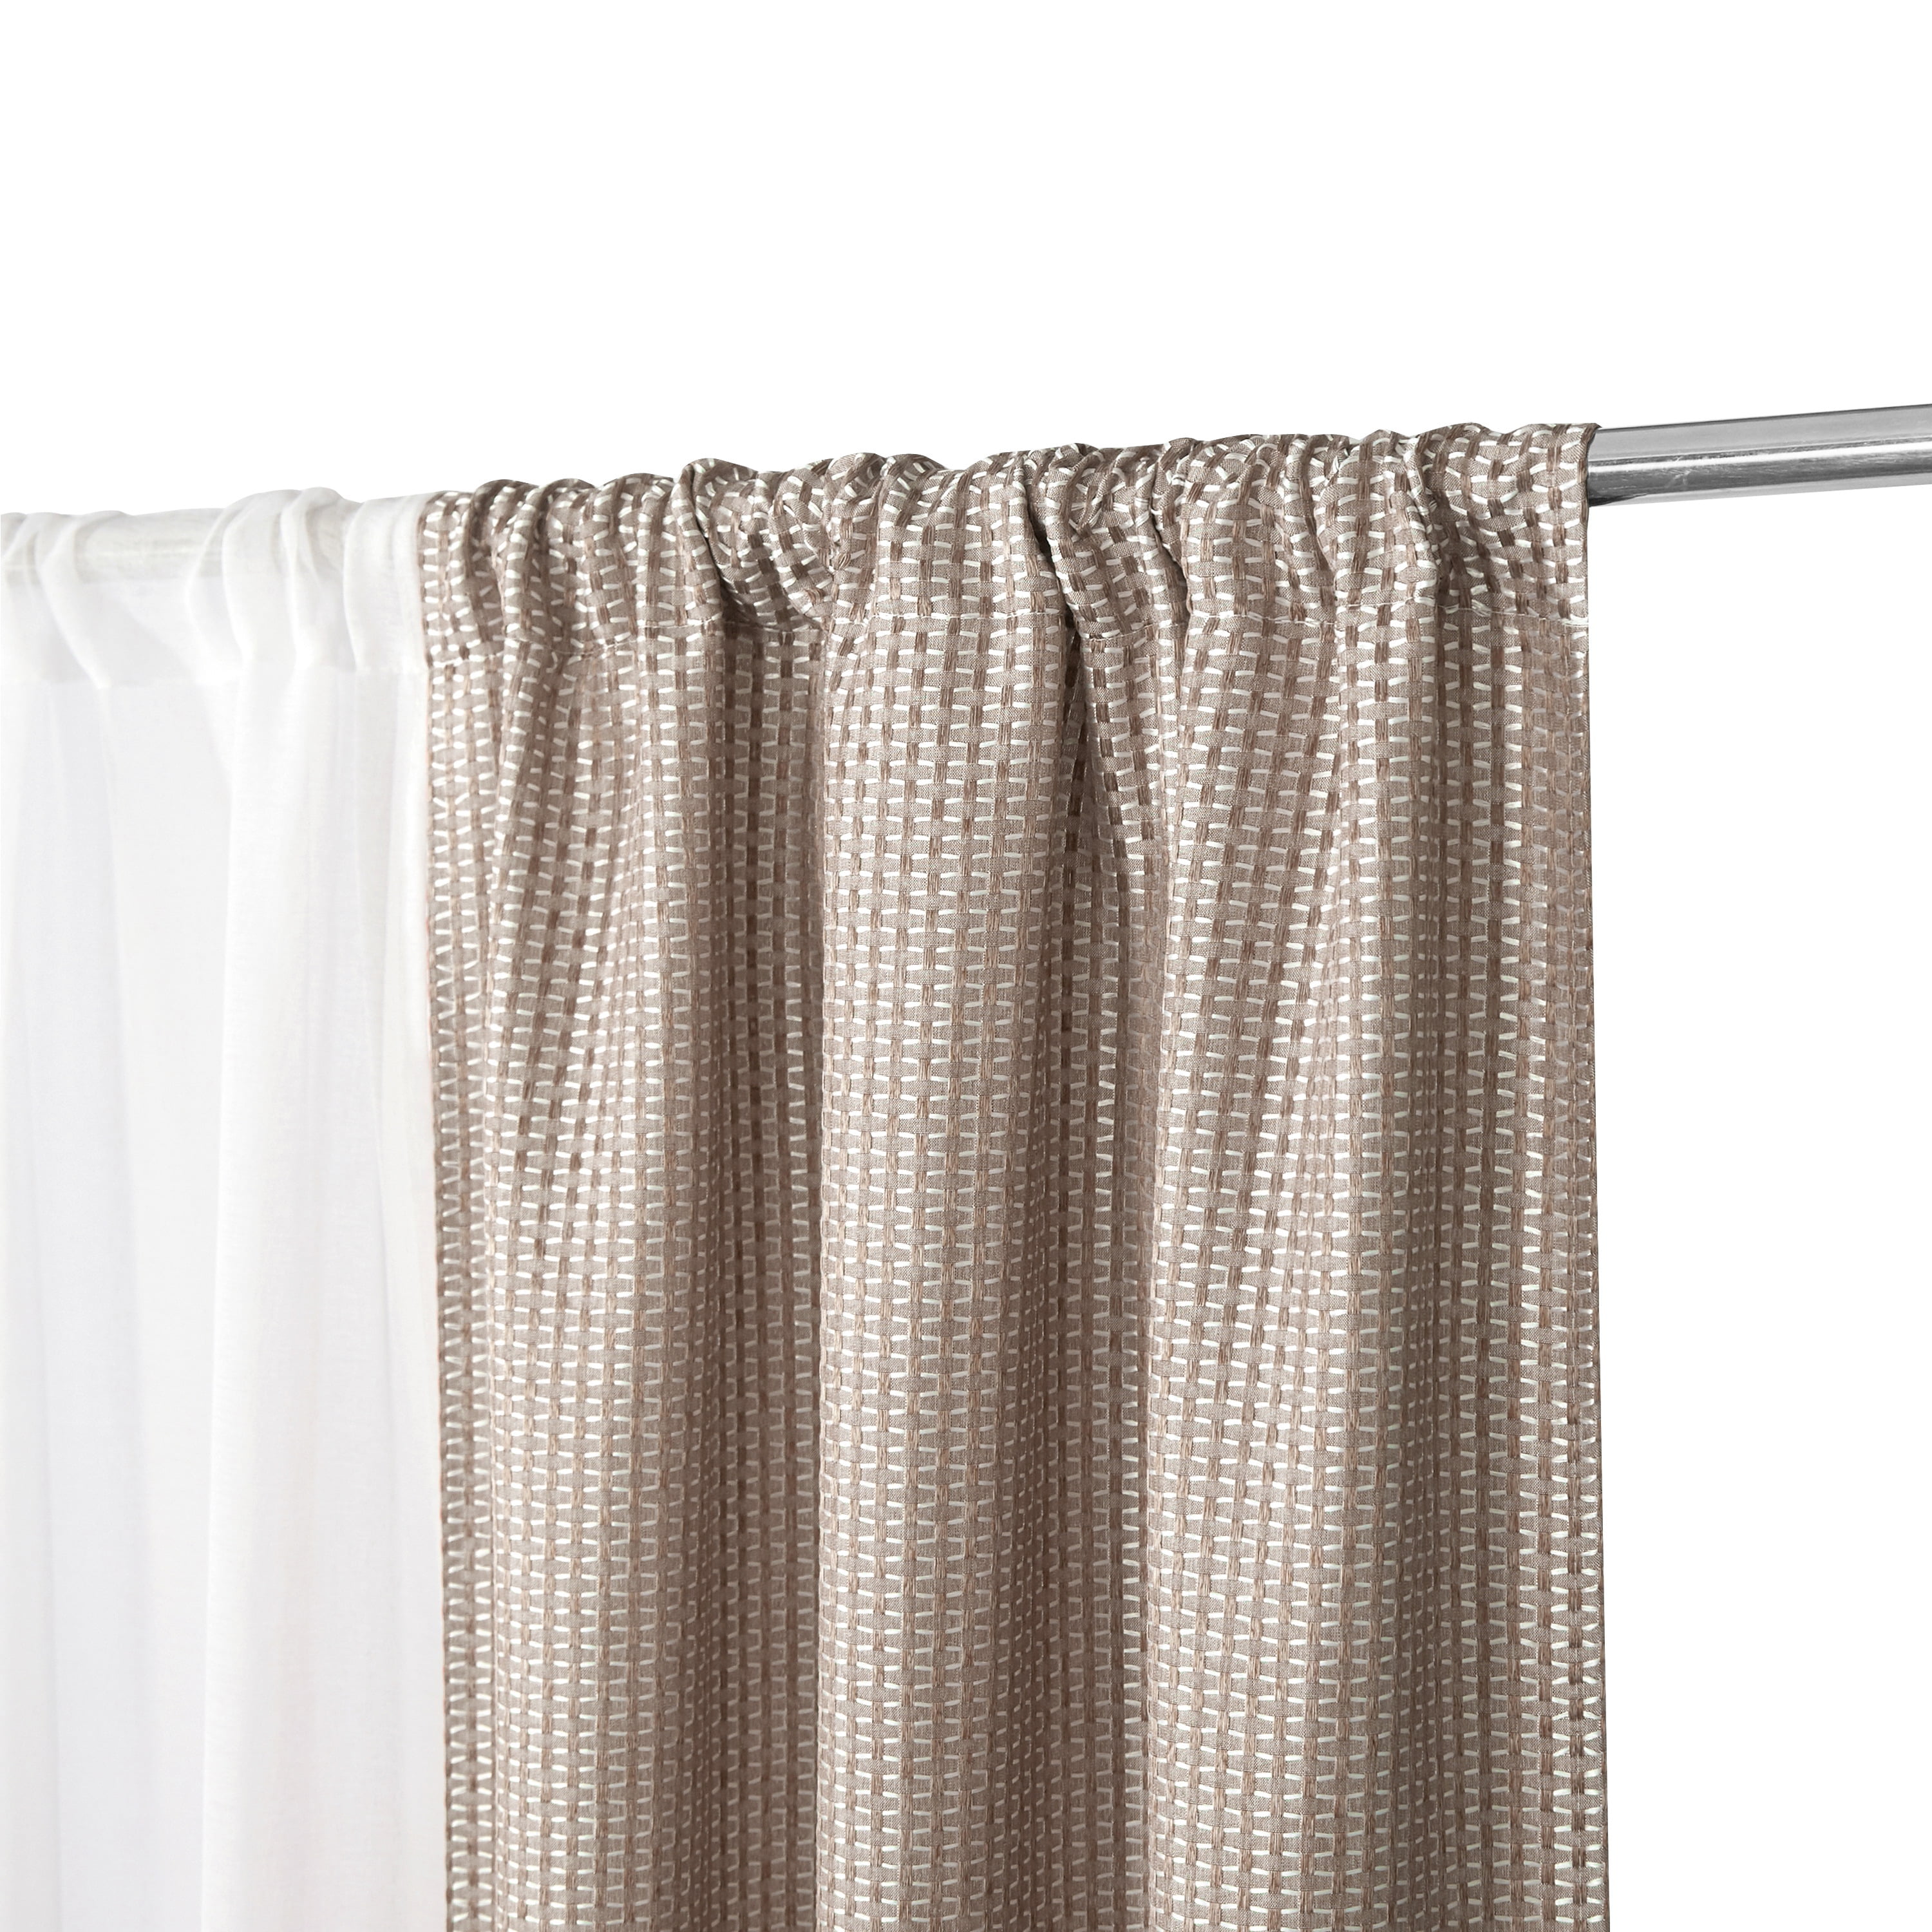 & Homes Taupe Better Stitch & Sheer & Open Curtain Piece 4 Gardens Solid 74x63 Set, Taupe, Panel